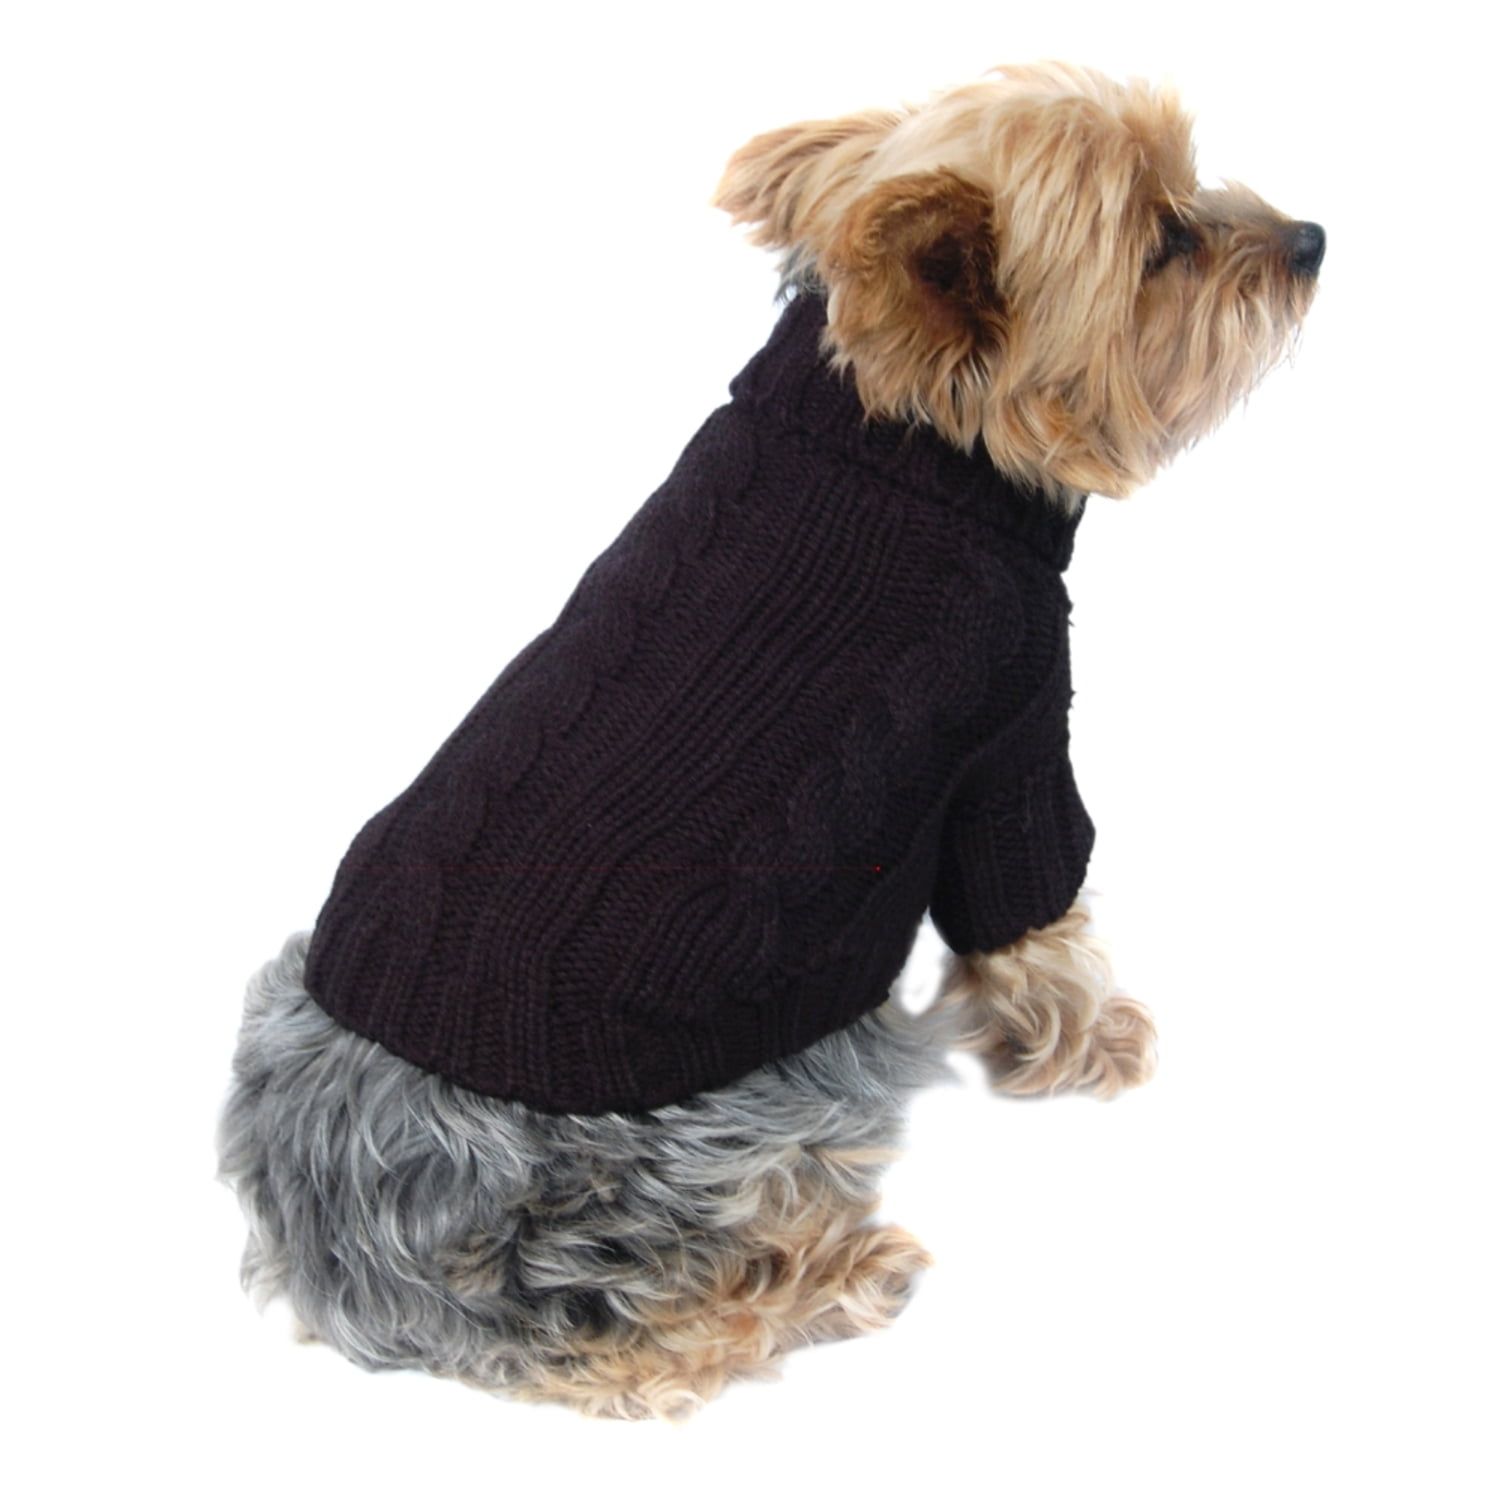 Black Pet Dog Cat Sweater Puppy Knit Jacket Clothes Apparel For Medium Dog (Size: M) (Gift for ...